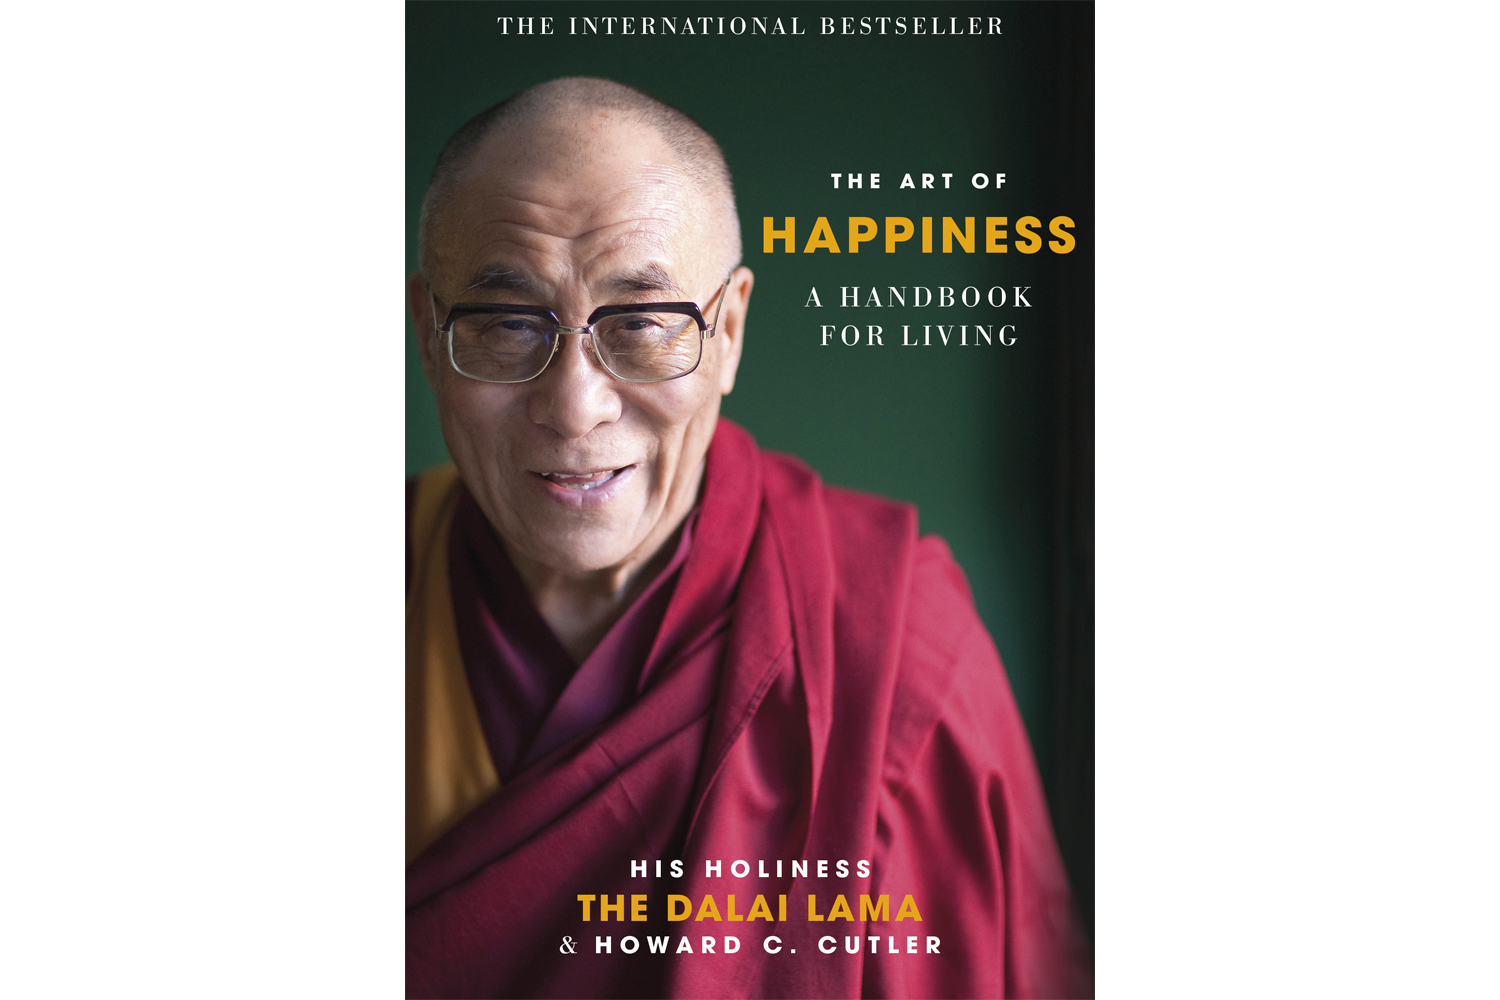 The Art of Happiness: A Handbook For Living by The Dalai Lama